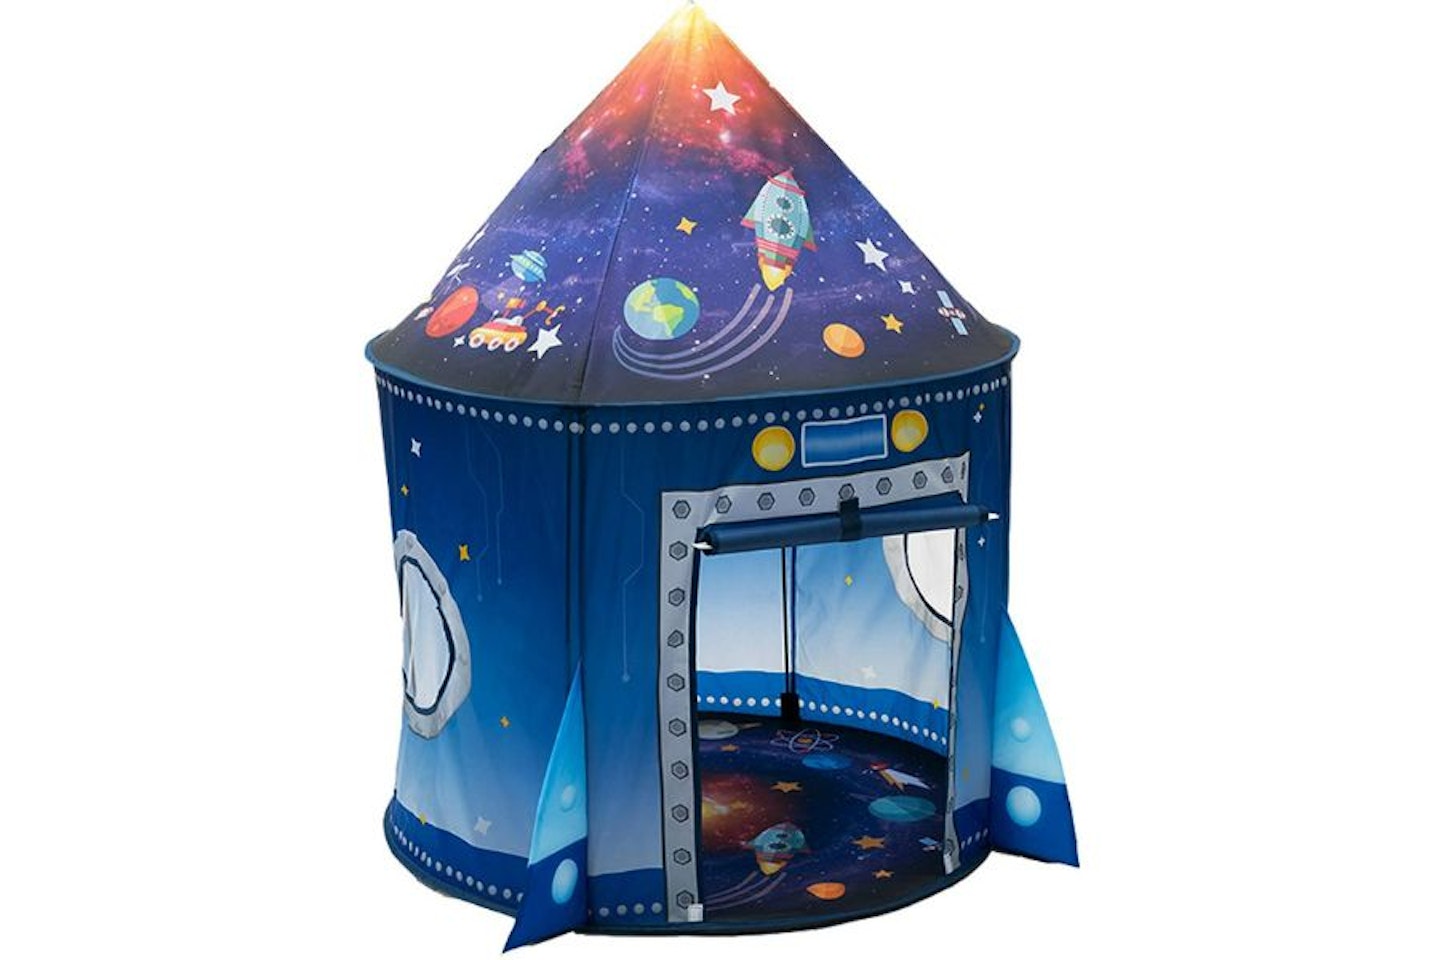 Space party ideas - WillingHeart Rocket Ship Play Tent